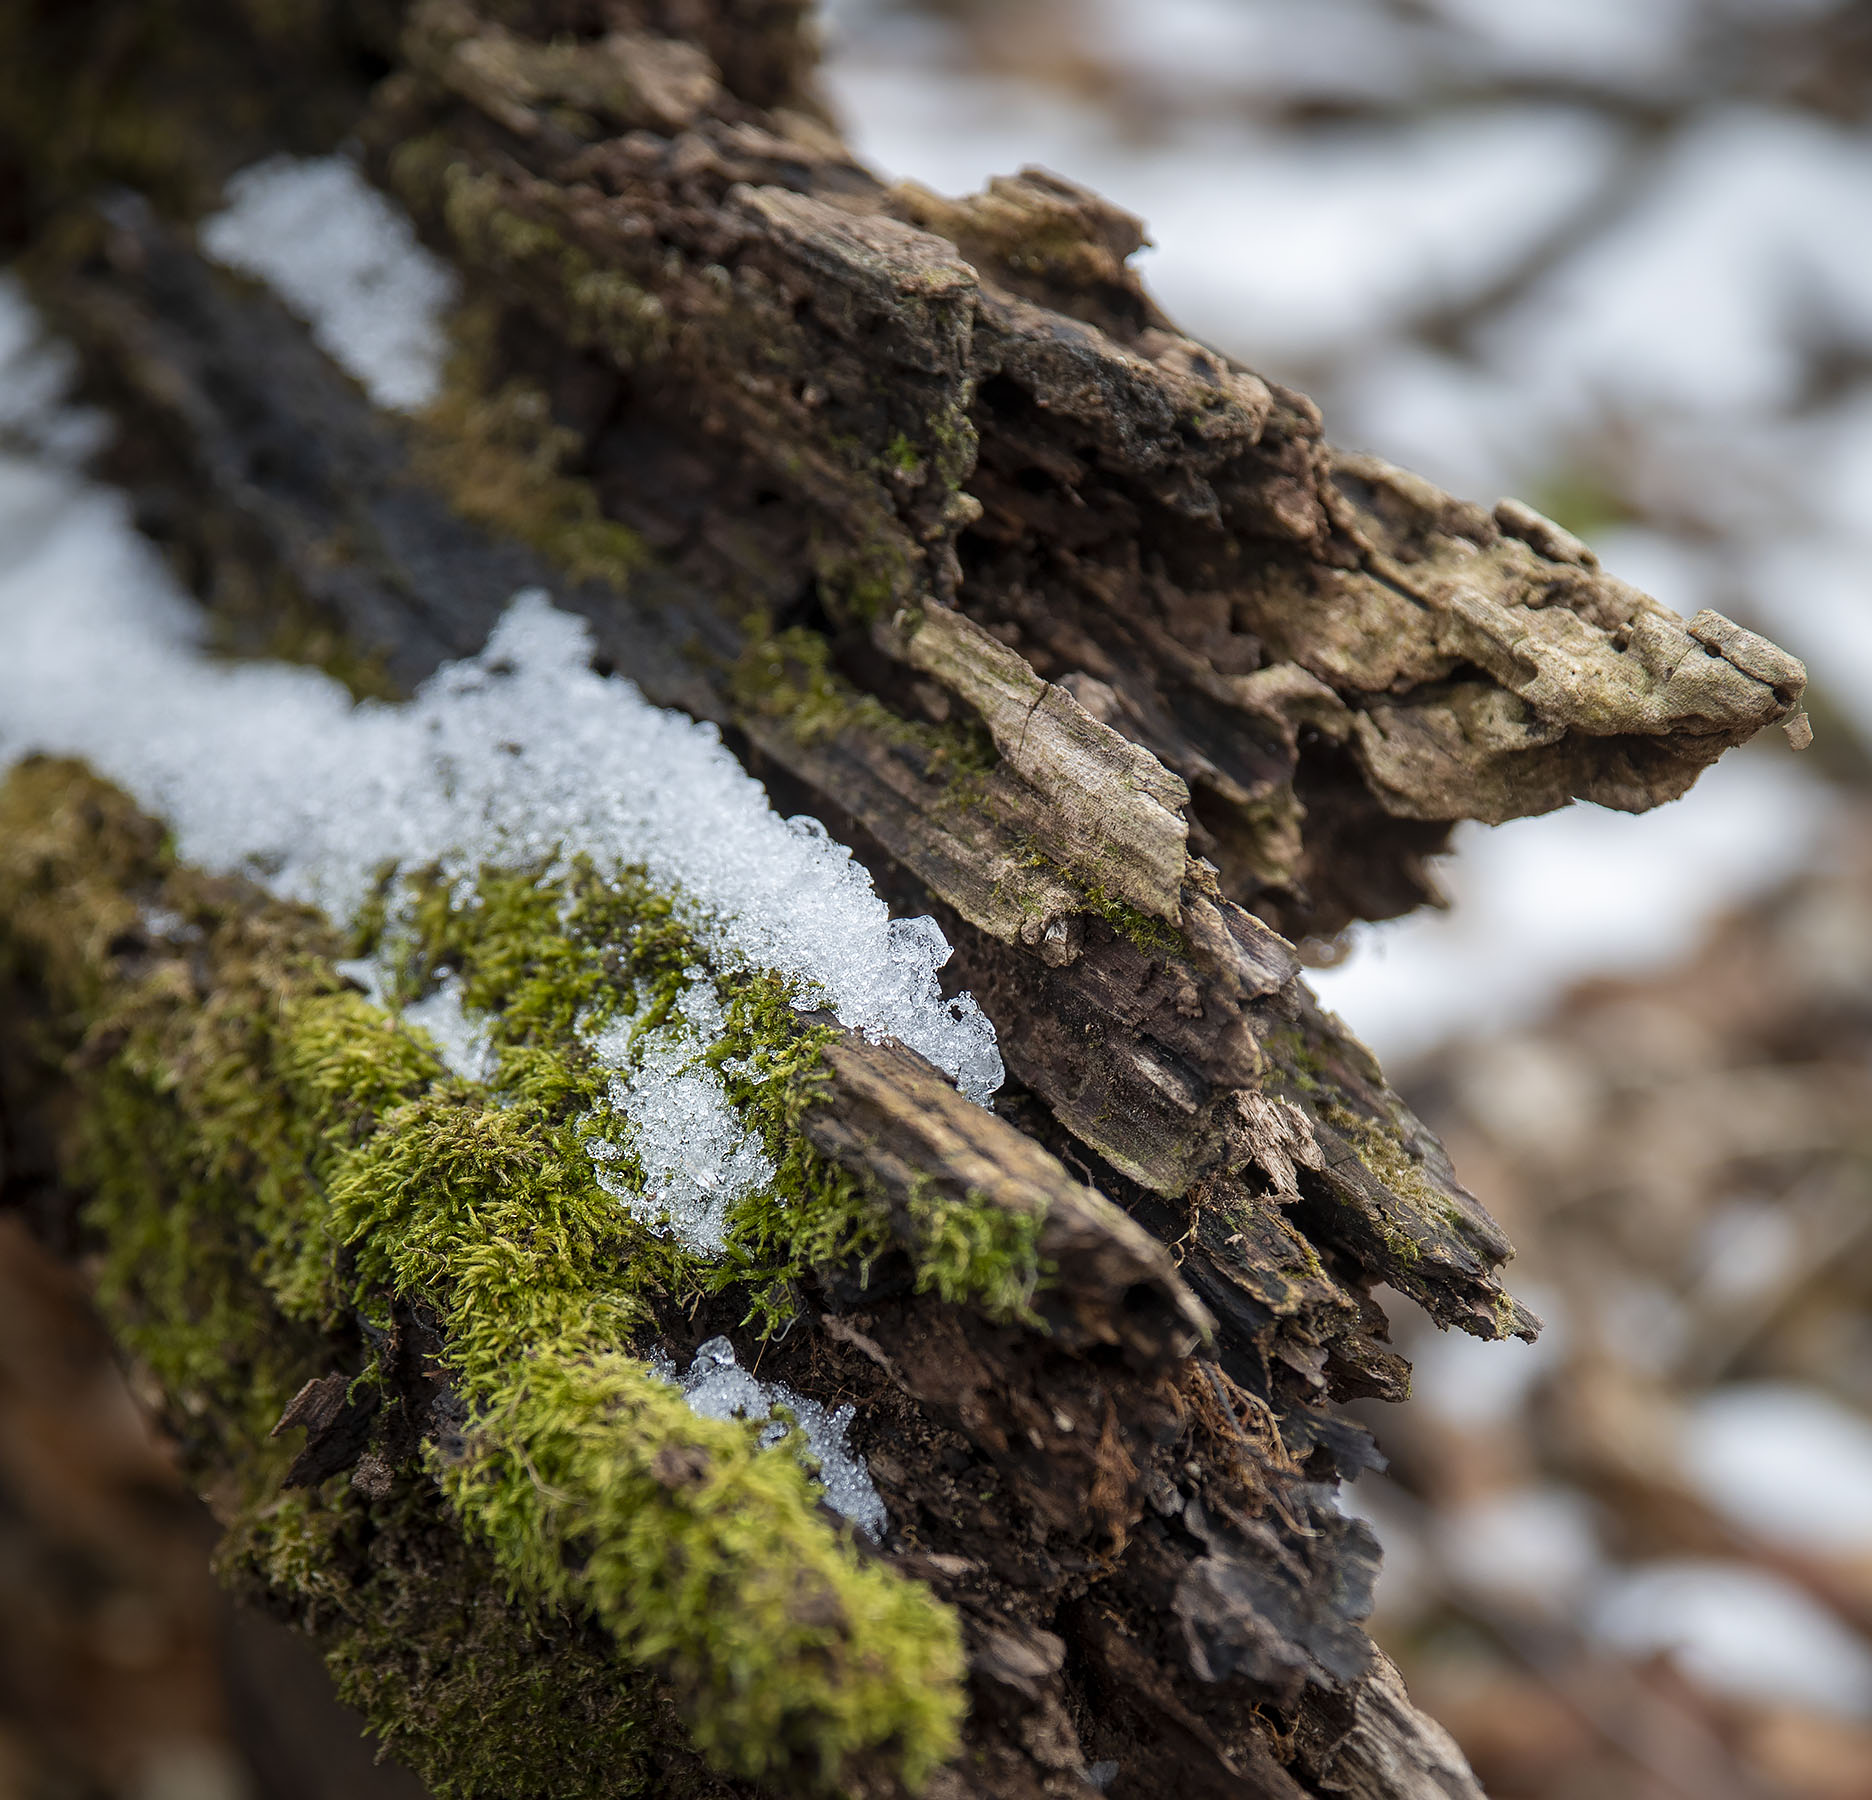 Snow and moss on a downed log